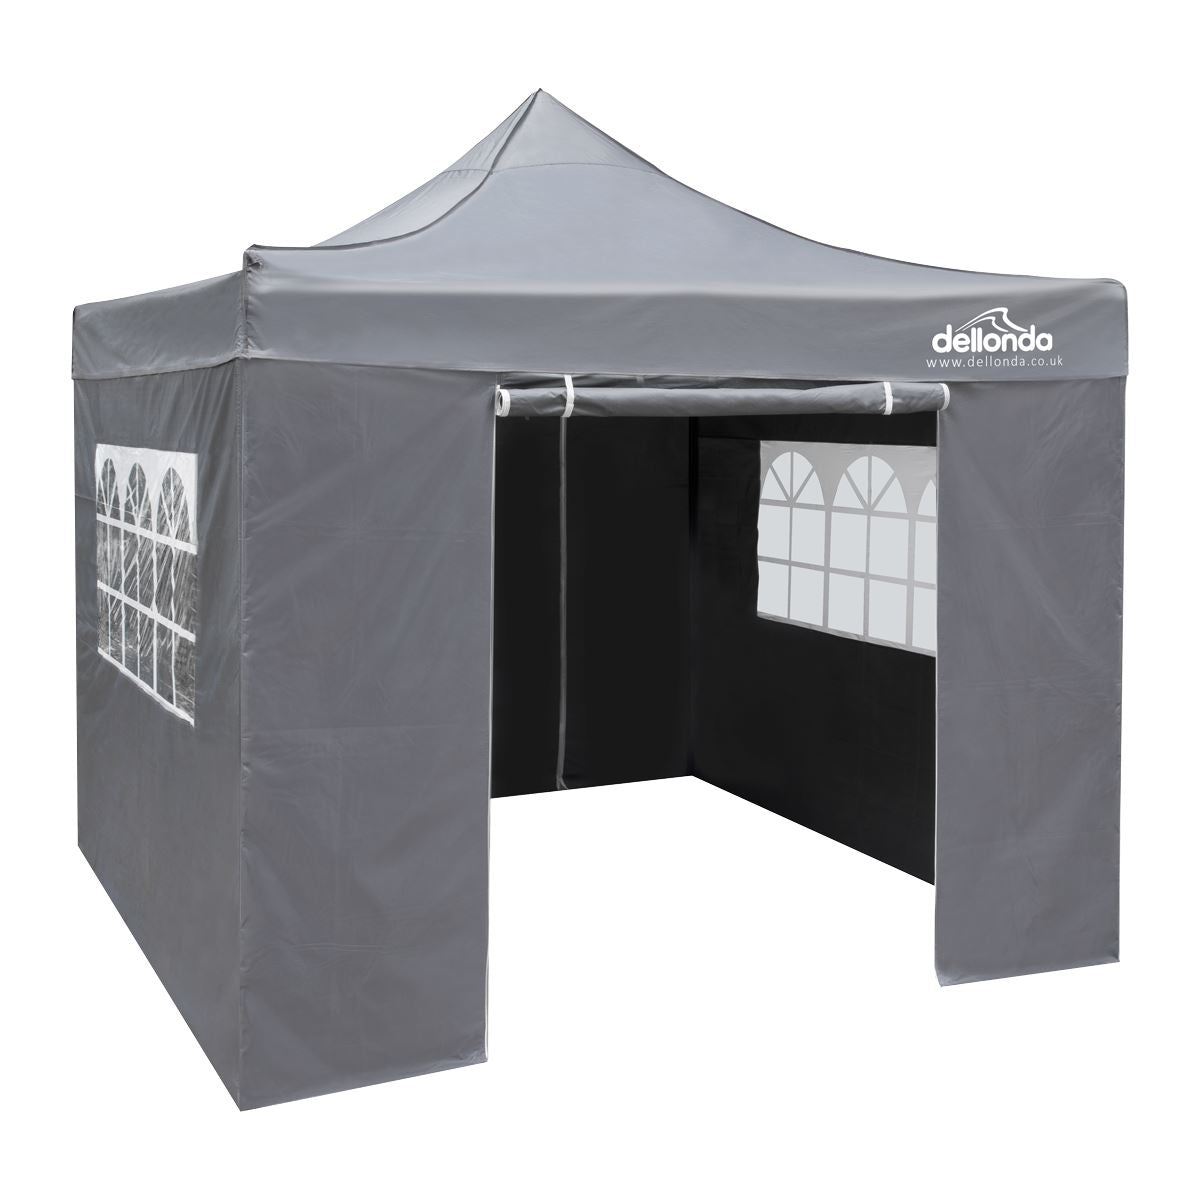 Dellonda Premium 2x2m Pop-Up Gazebo & Side Walls, PVC Coated, Water Resistant Fabric, Supplied with Carry Bag, Rope, Stakes & Weight Bags - Grey